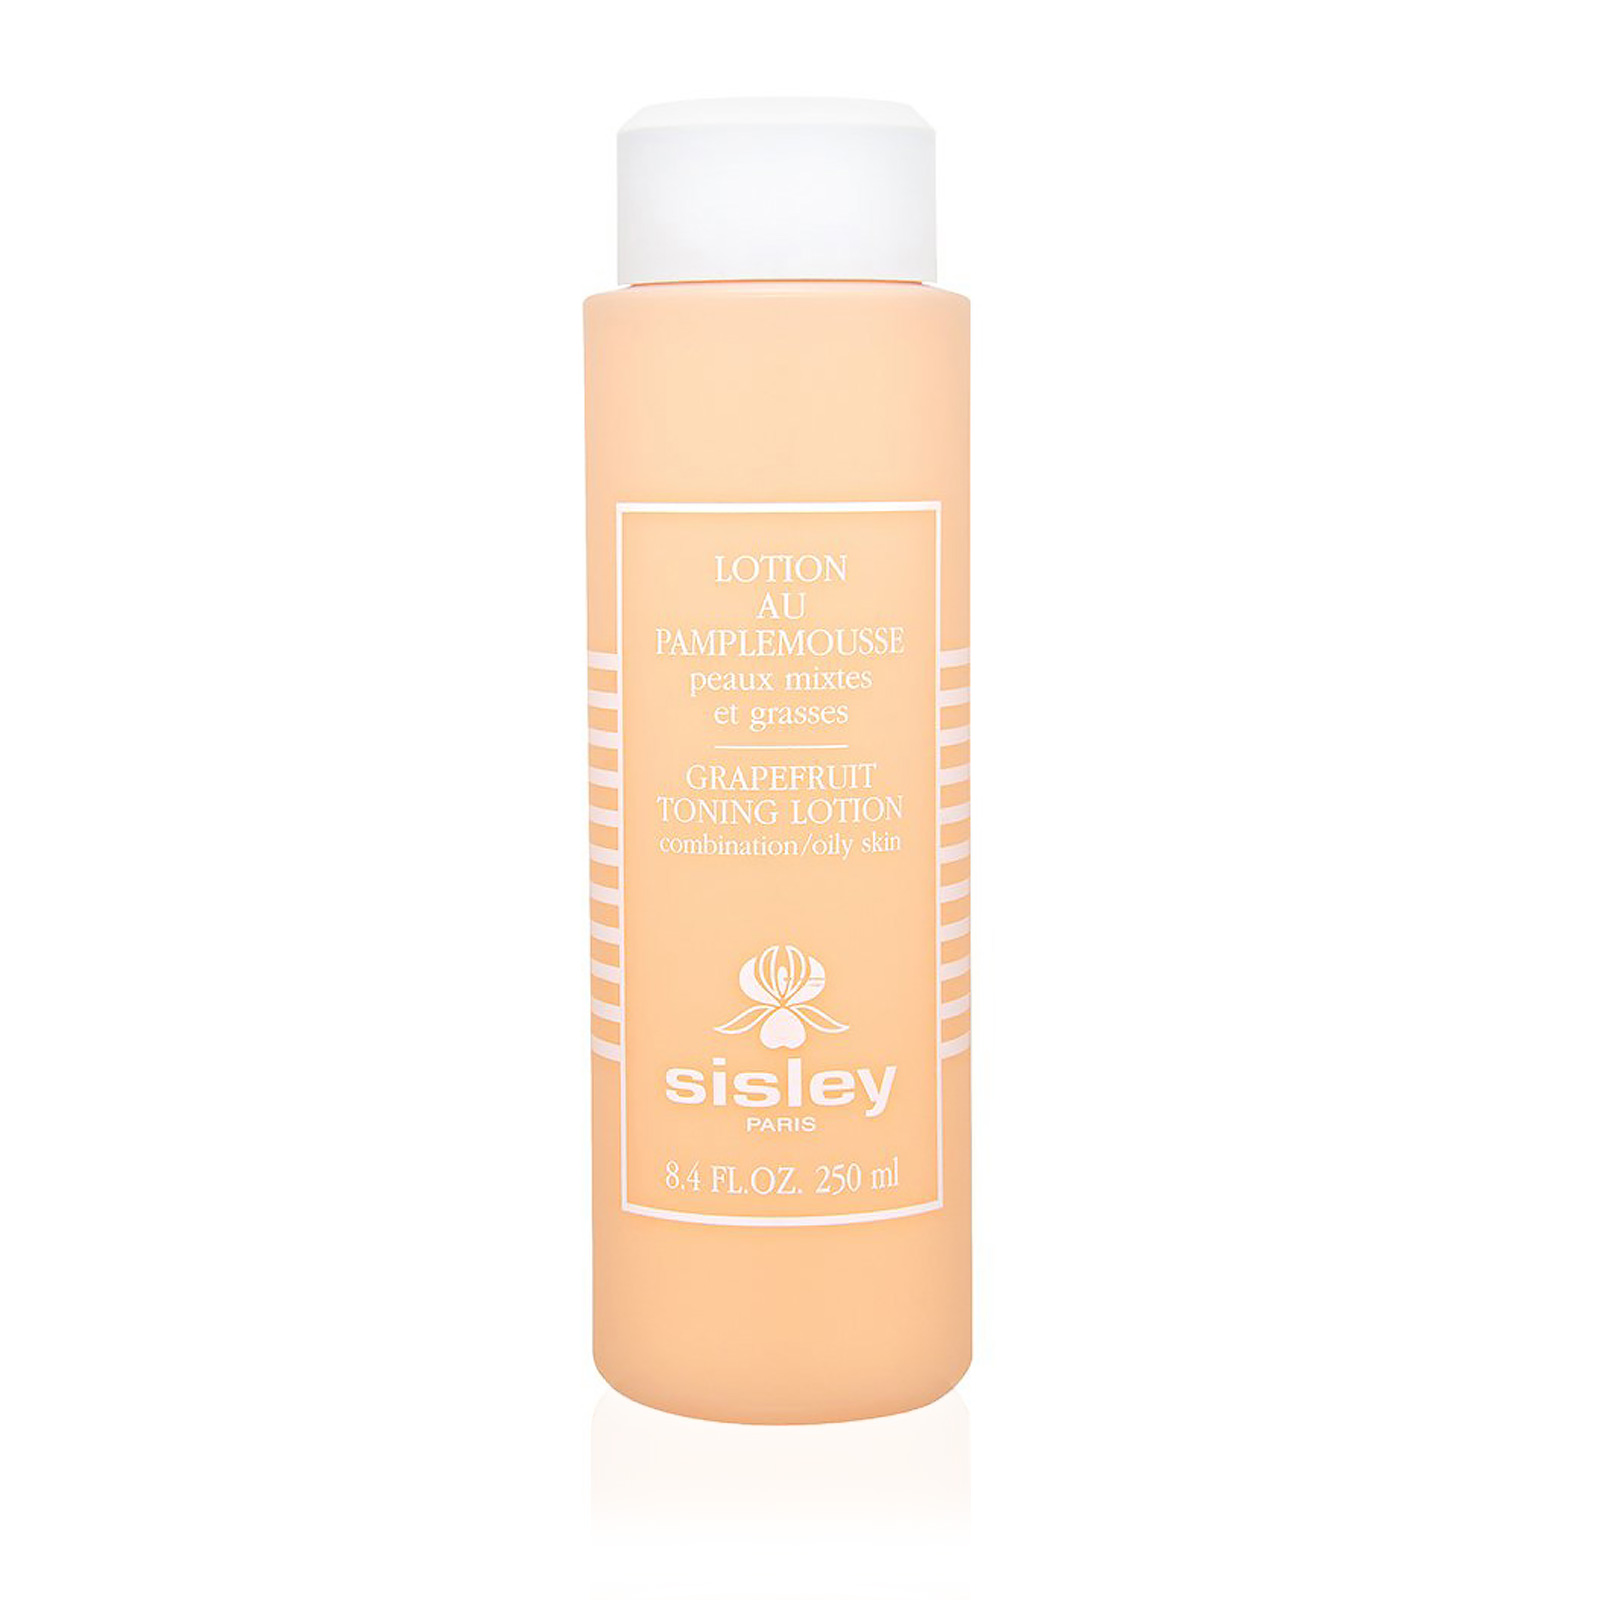 Grapefruit Toning Lotion (For Combination / Oily Skin)